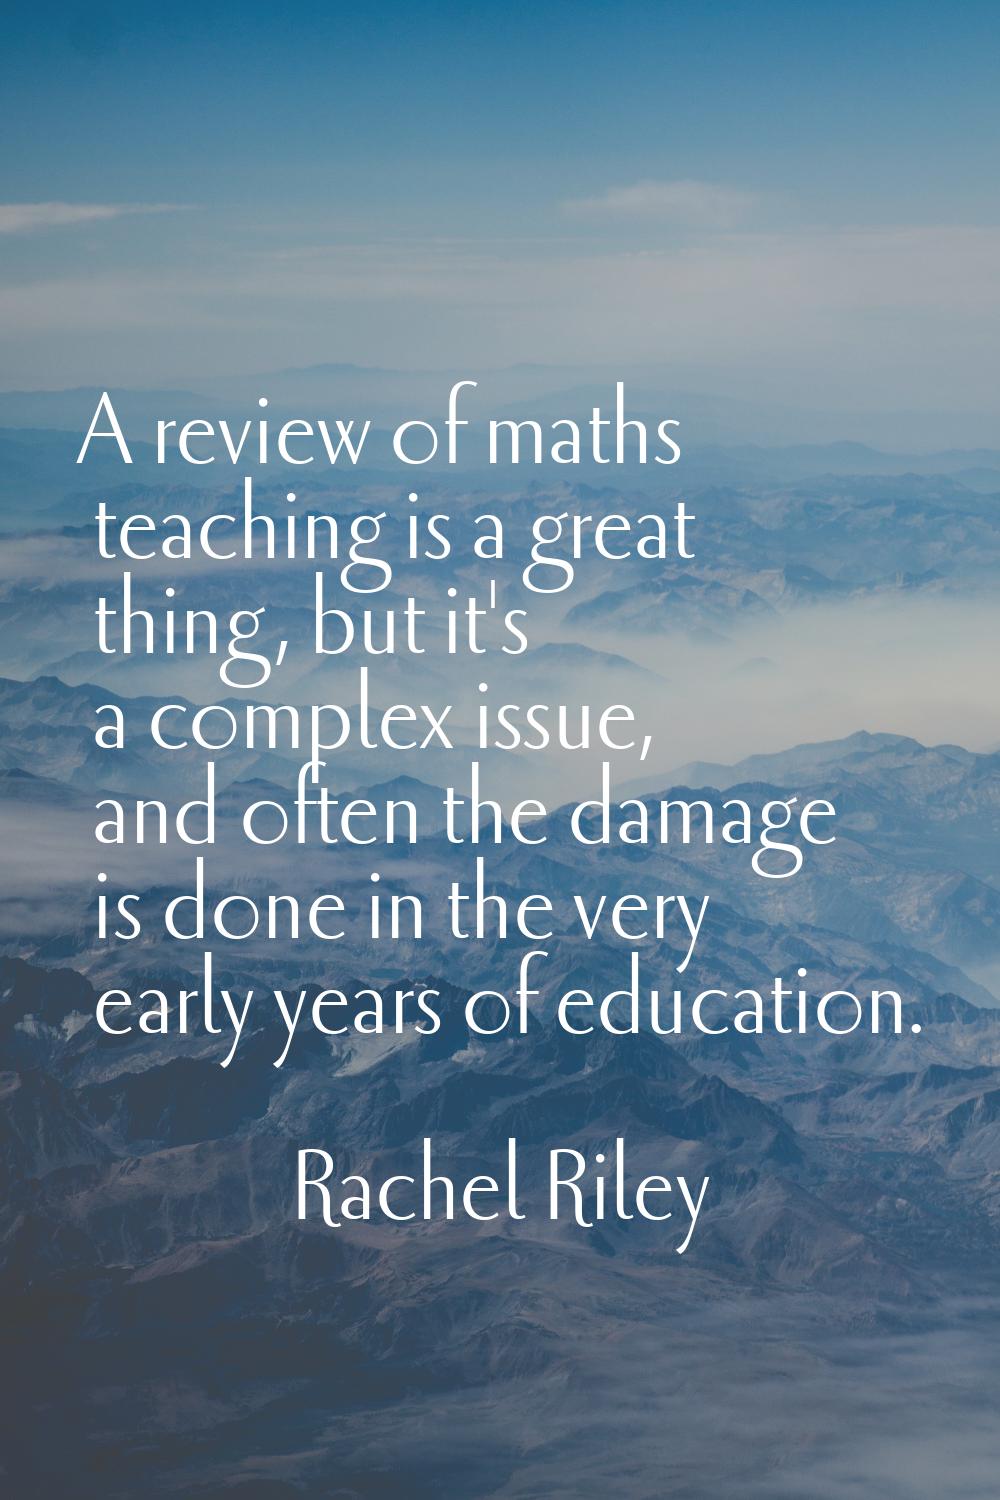 A review of maths teaching is a great thing, but it's a complex issue, and often the damage is done